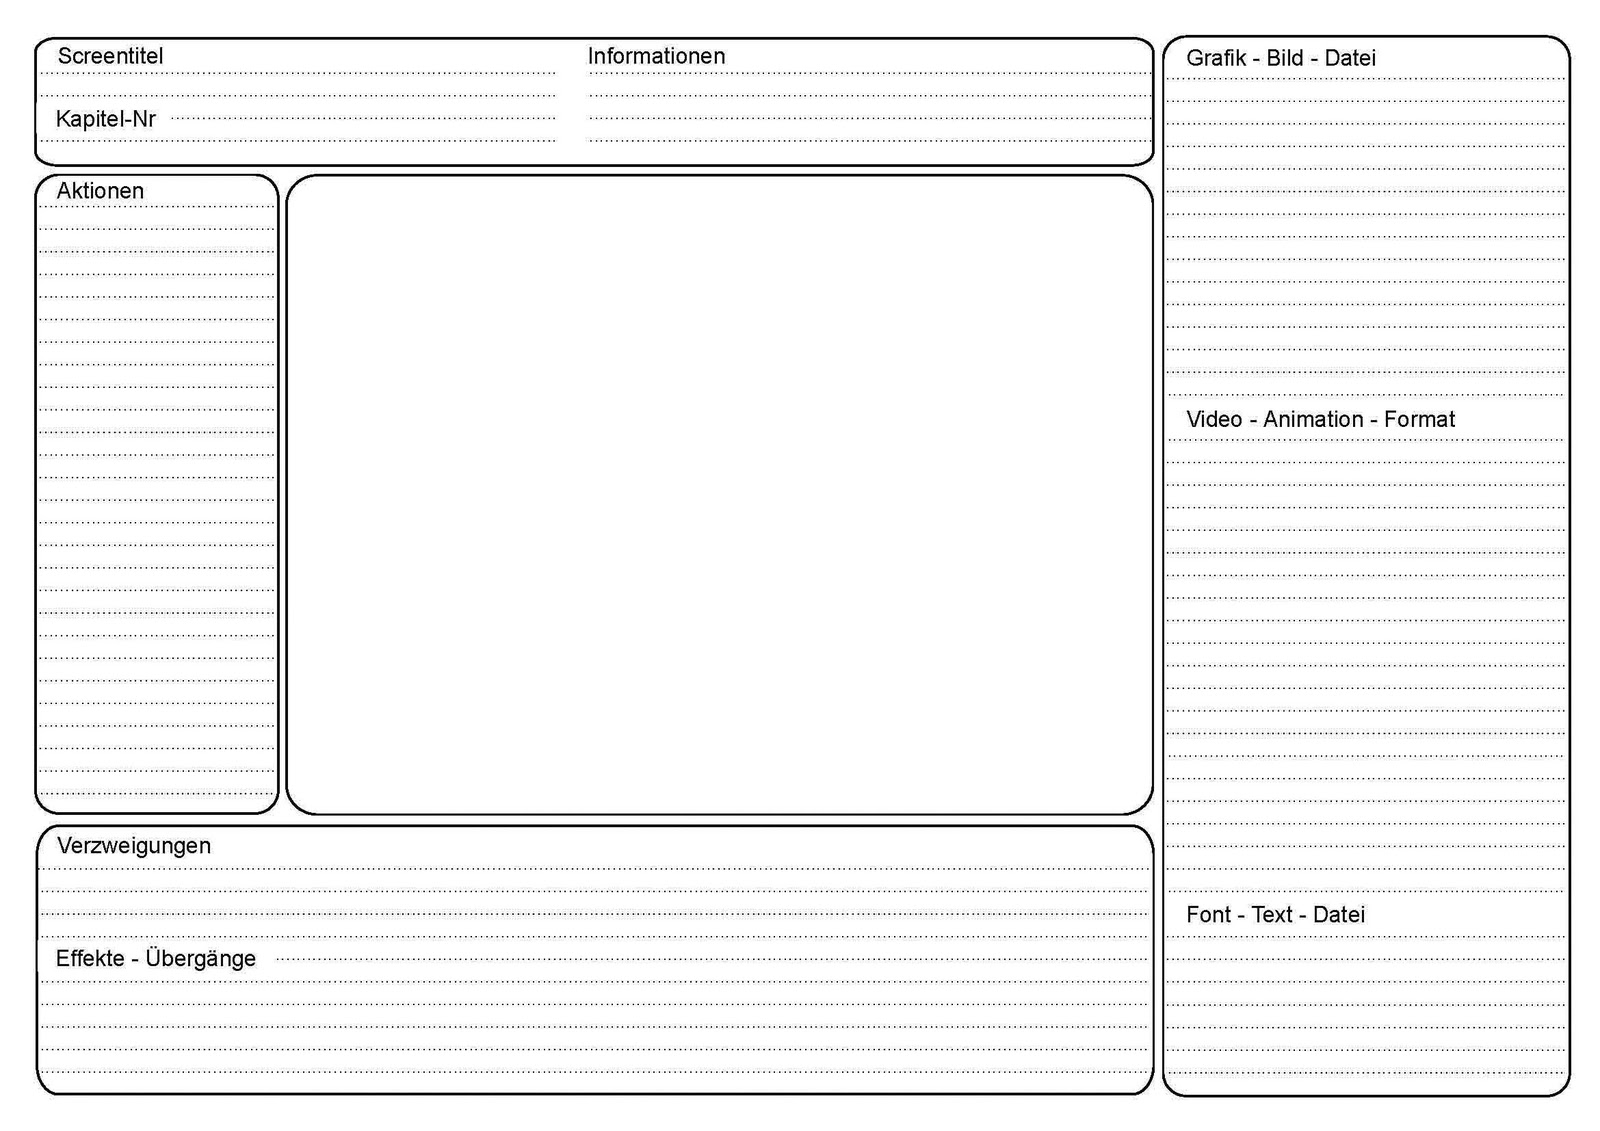 Reflective Journal: Advance functional layout/ wireframes